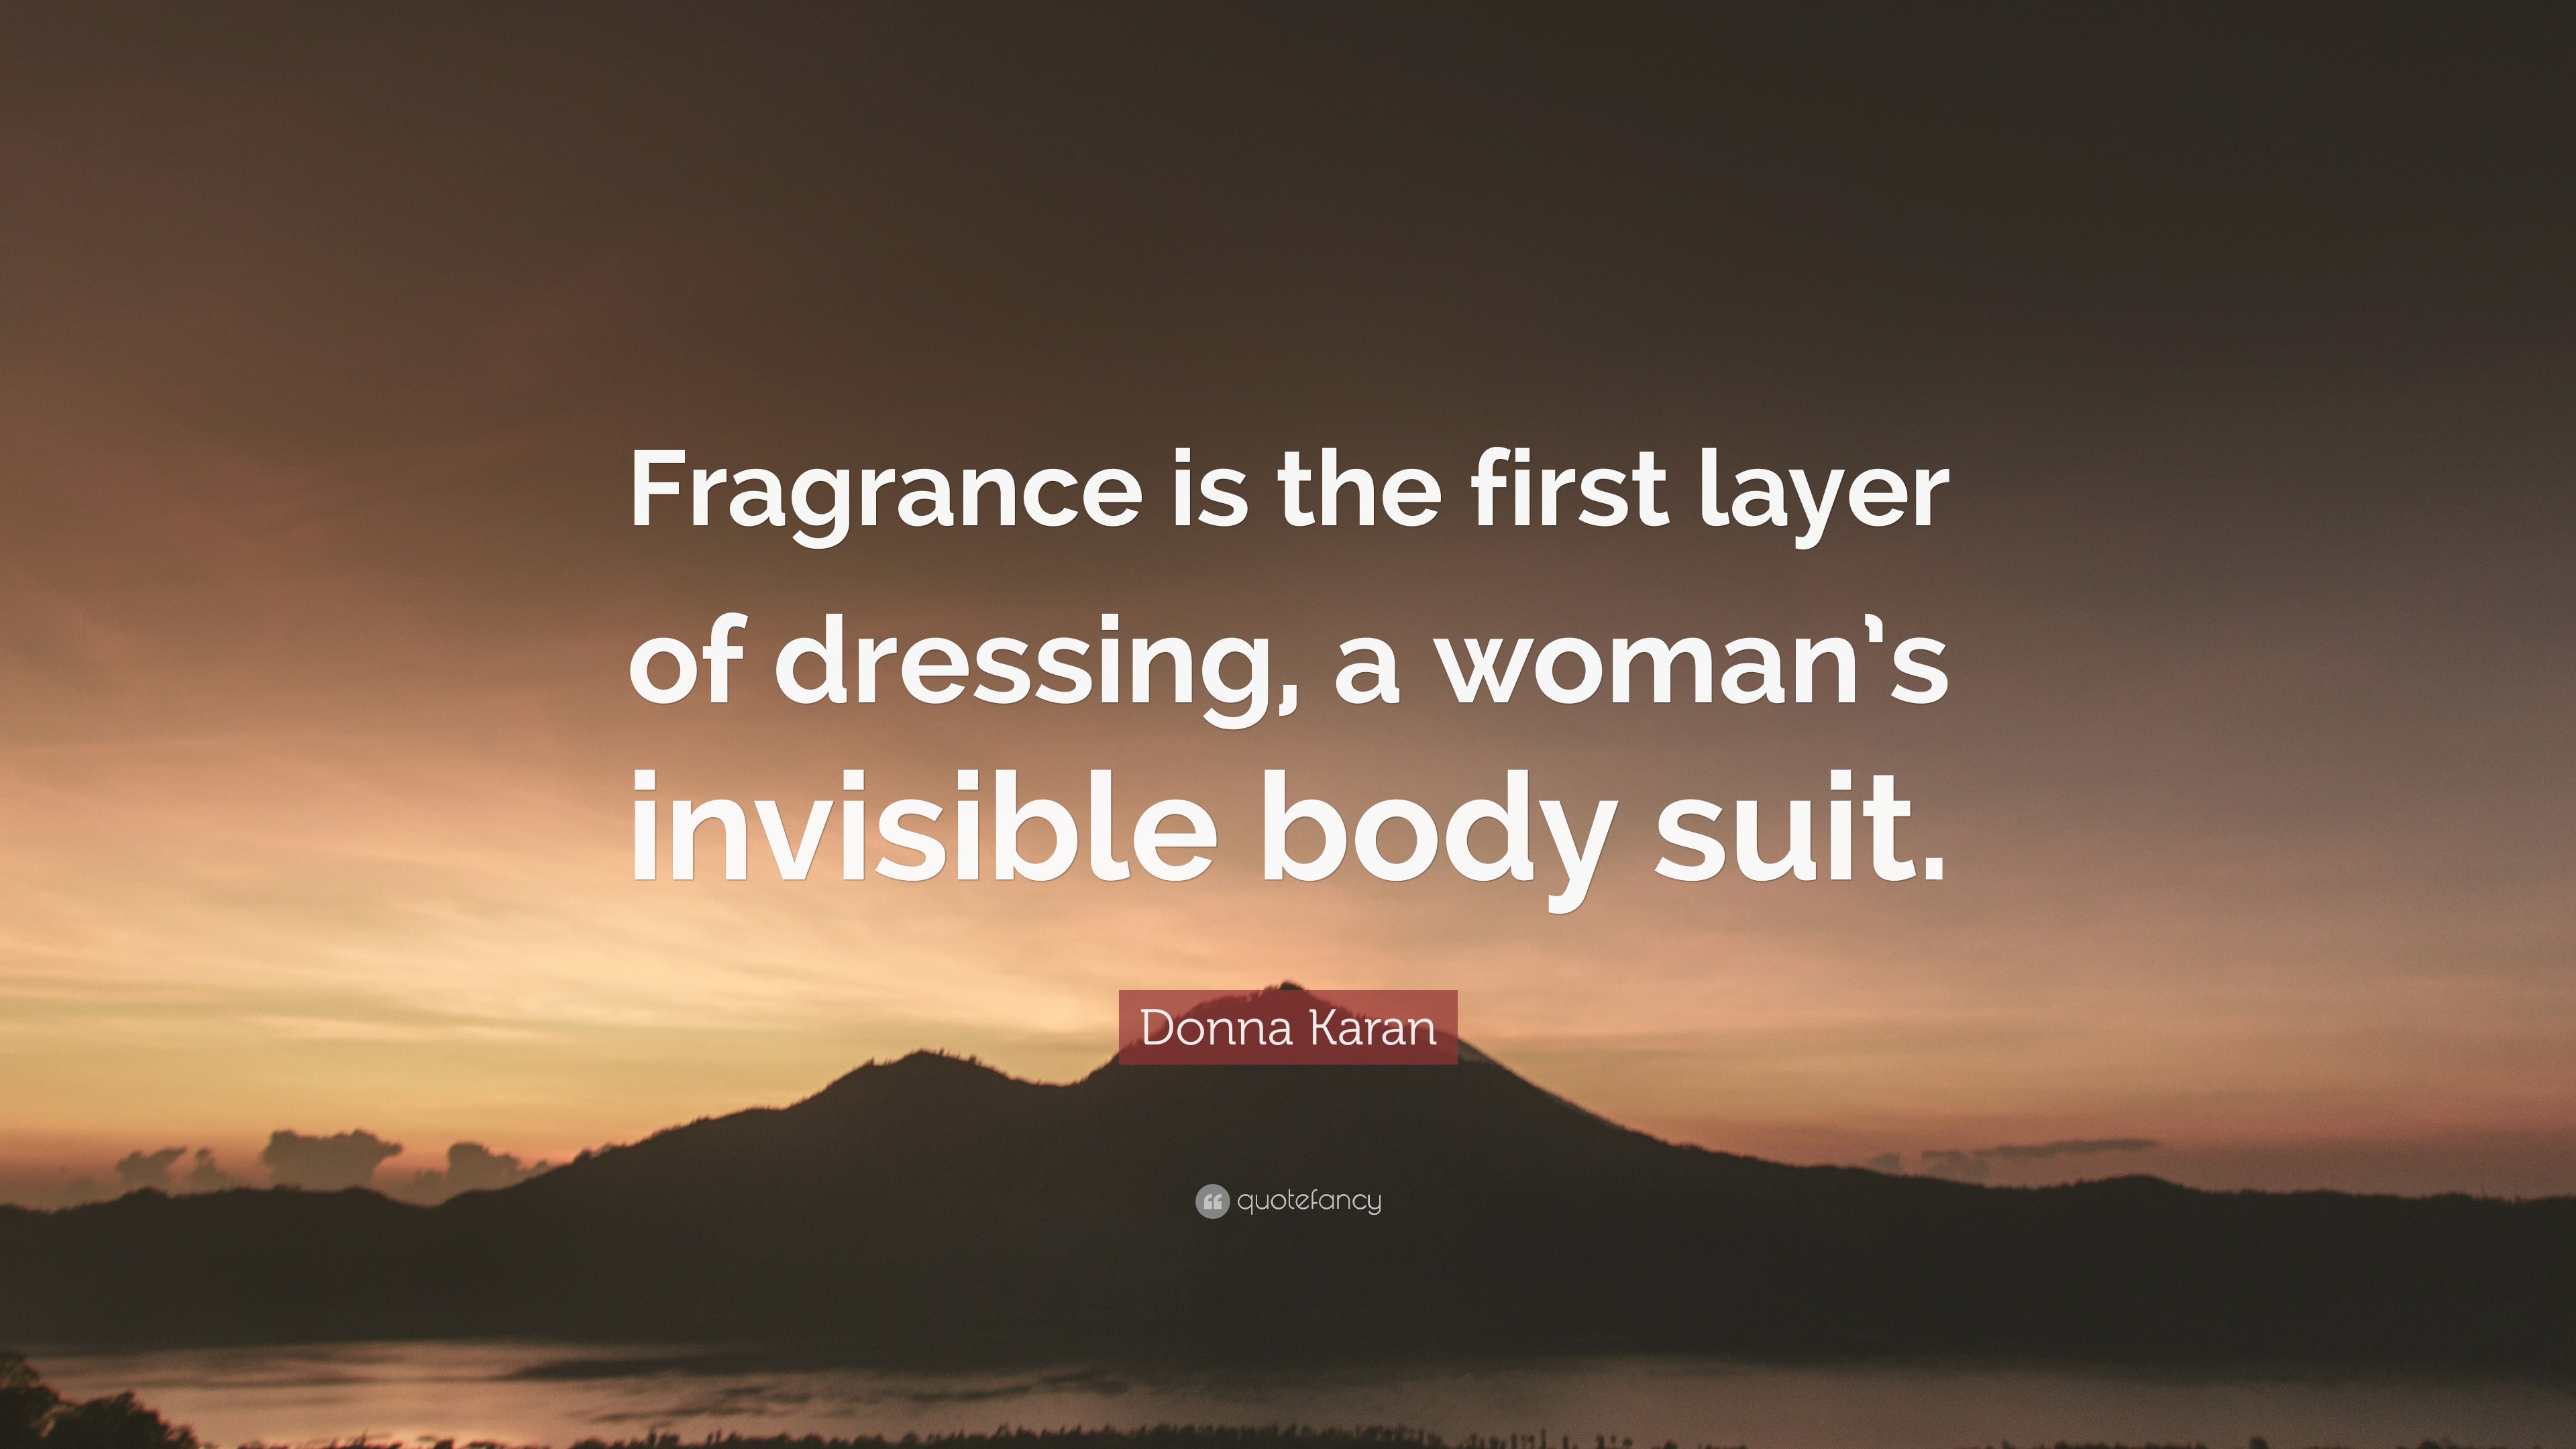 Donna Karan Quote: “Fragrance is the first layer of dressing, a woman's invisible  body suit.”